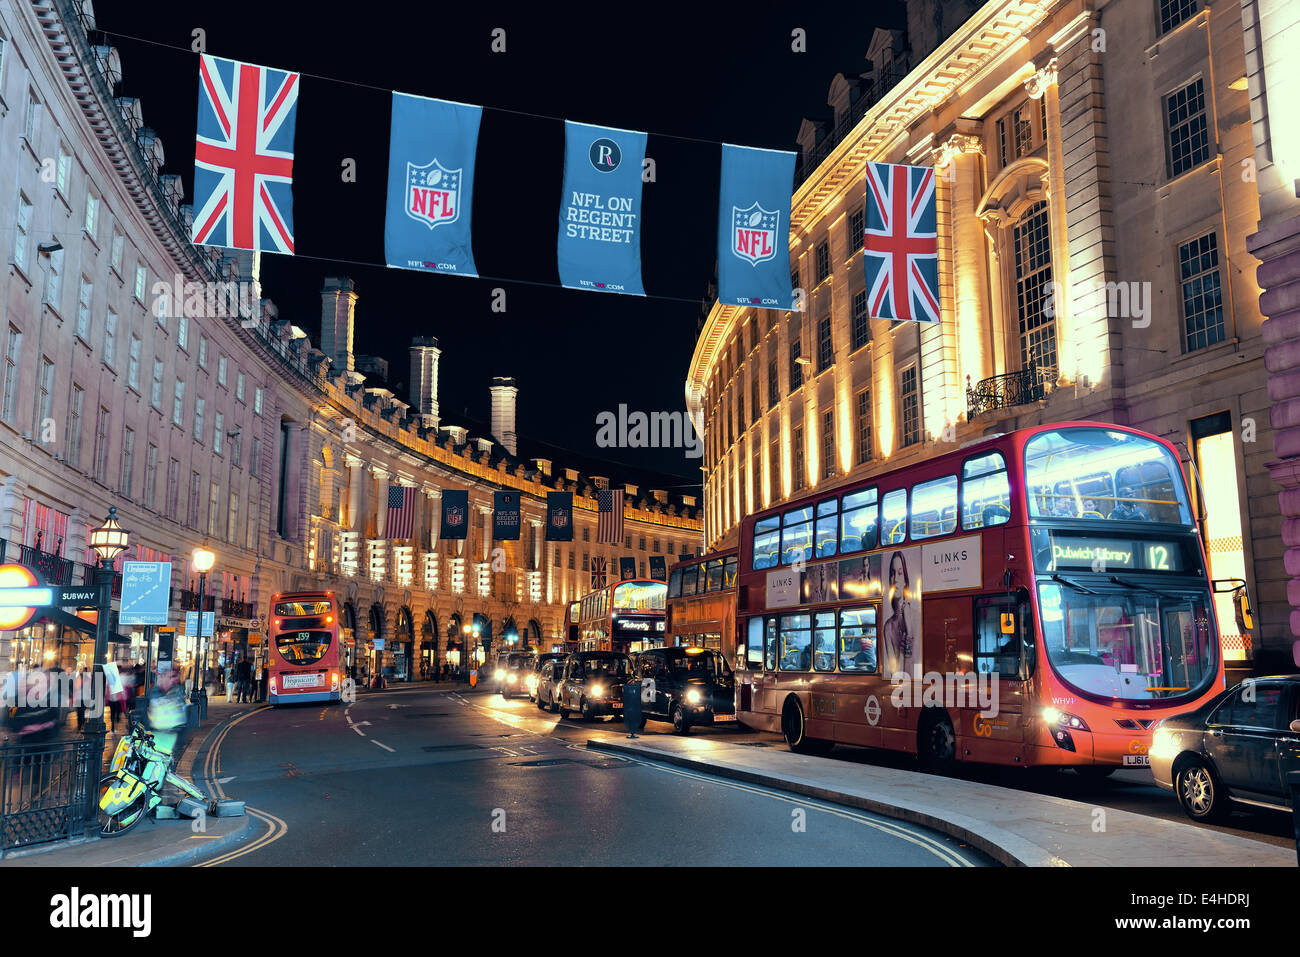 LONDON, UK - SEP 27: London Street view at night on September 27, 2013 in London, UK. London is the world's most visited city and the capital of UK. Stock Photo